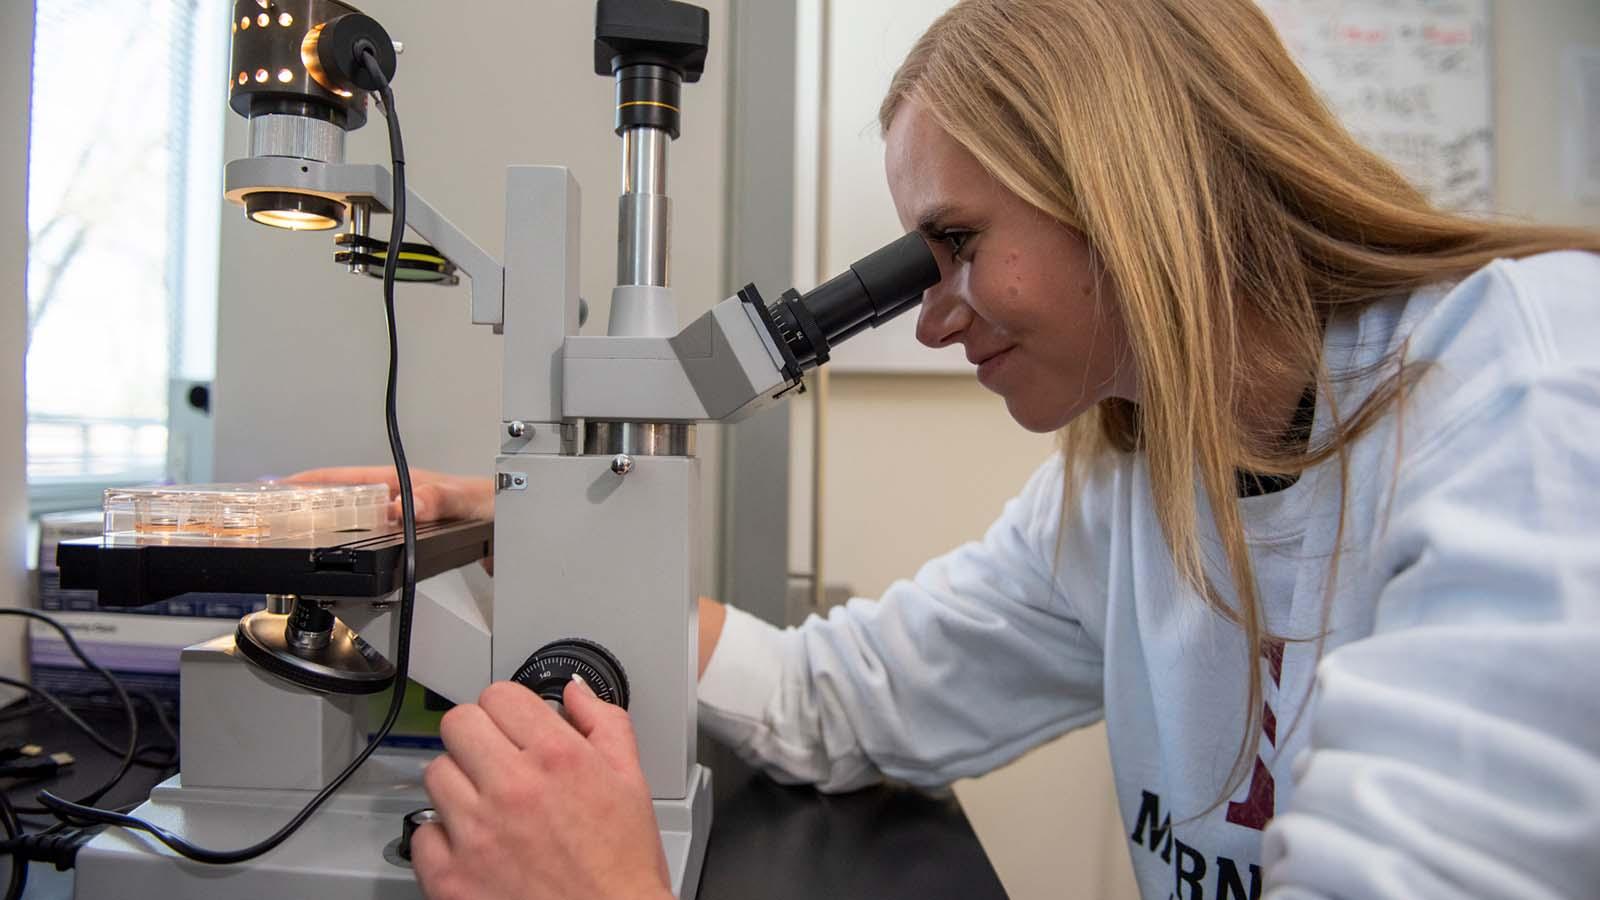 A Morningside student using a microscope.